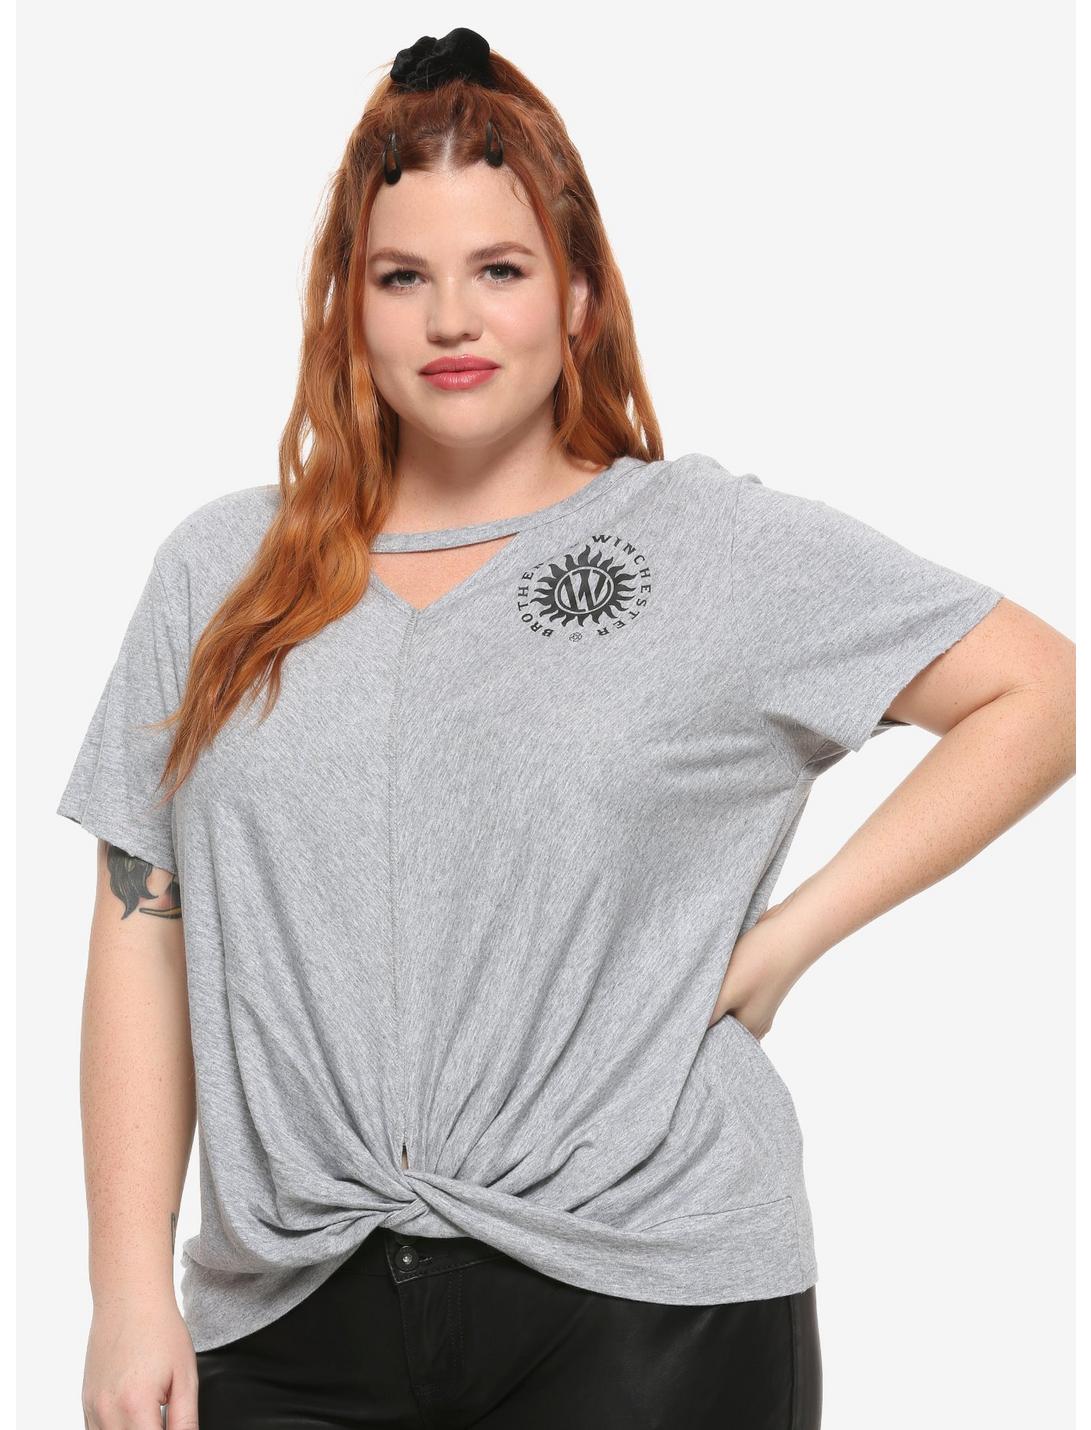 Supernatural Winchester Brothers Twist-Front Girls T-Shirt Plus Size, BLACK, hi-res